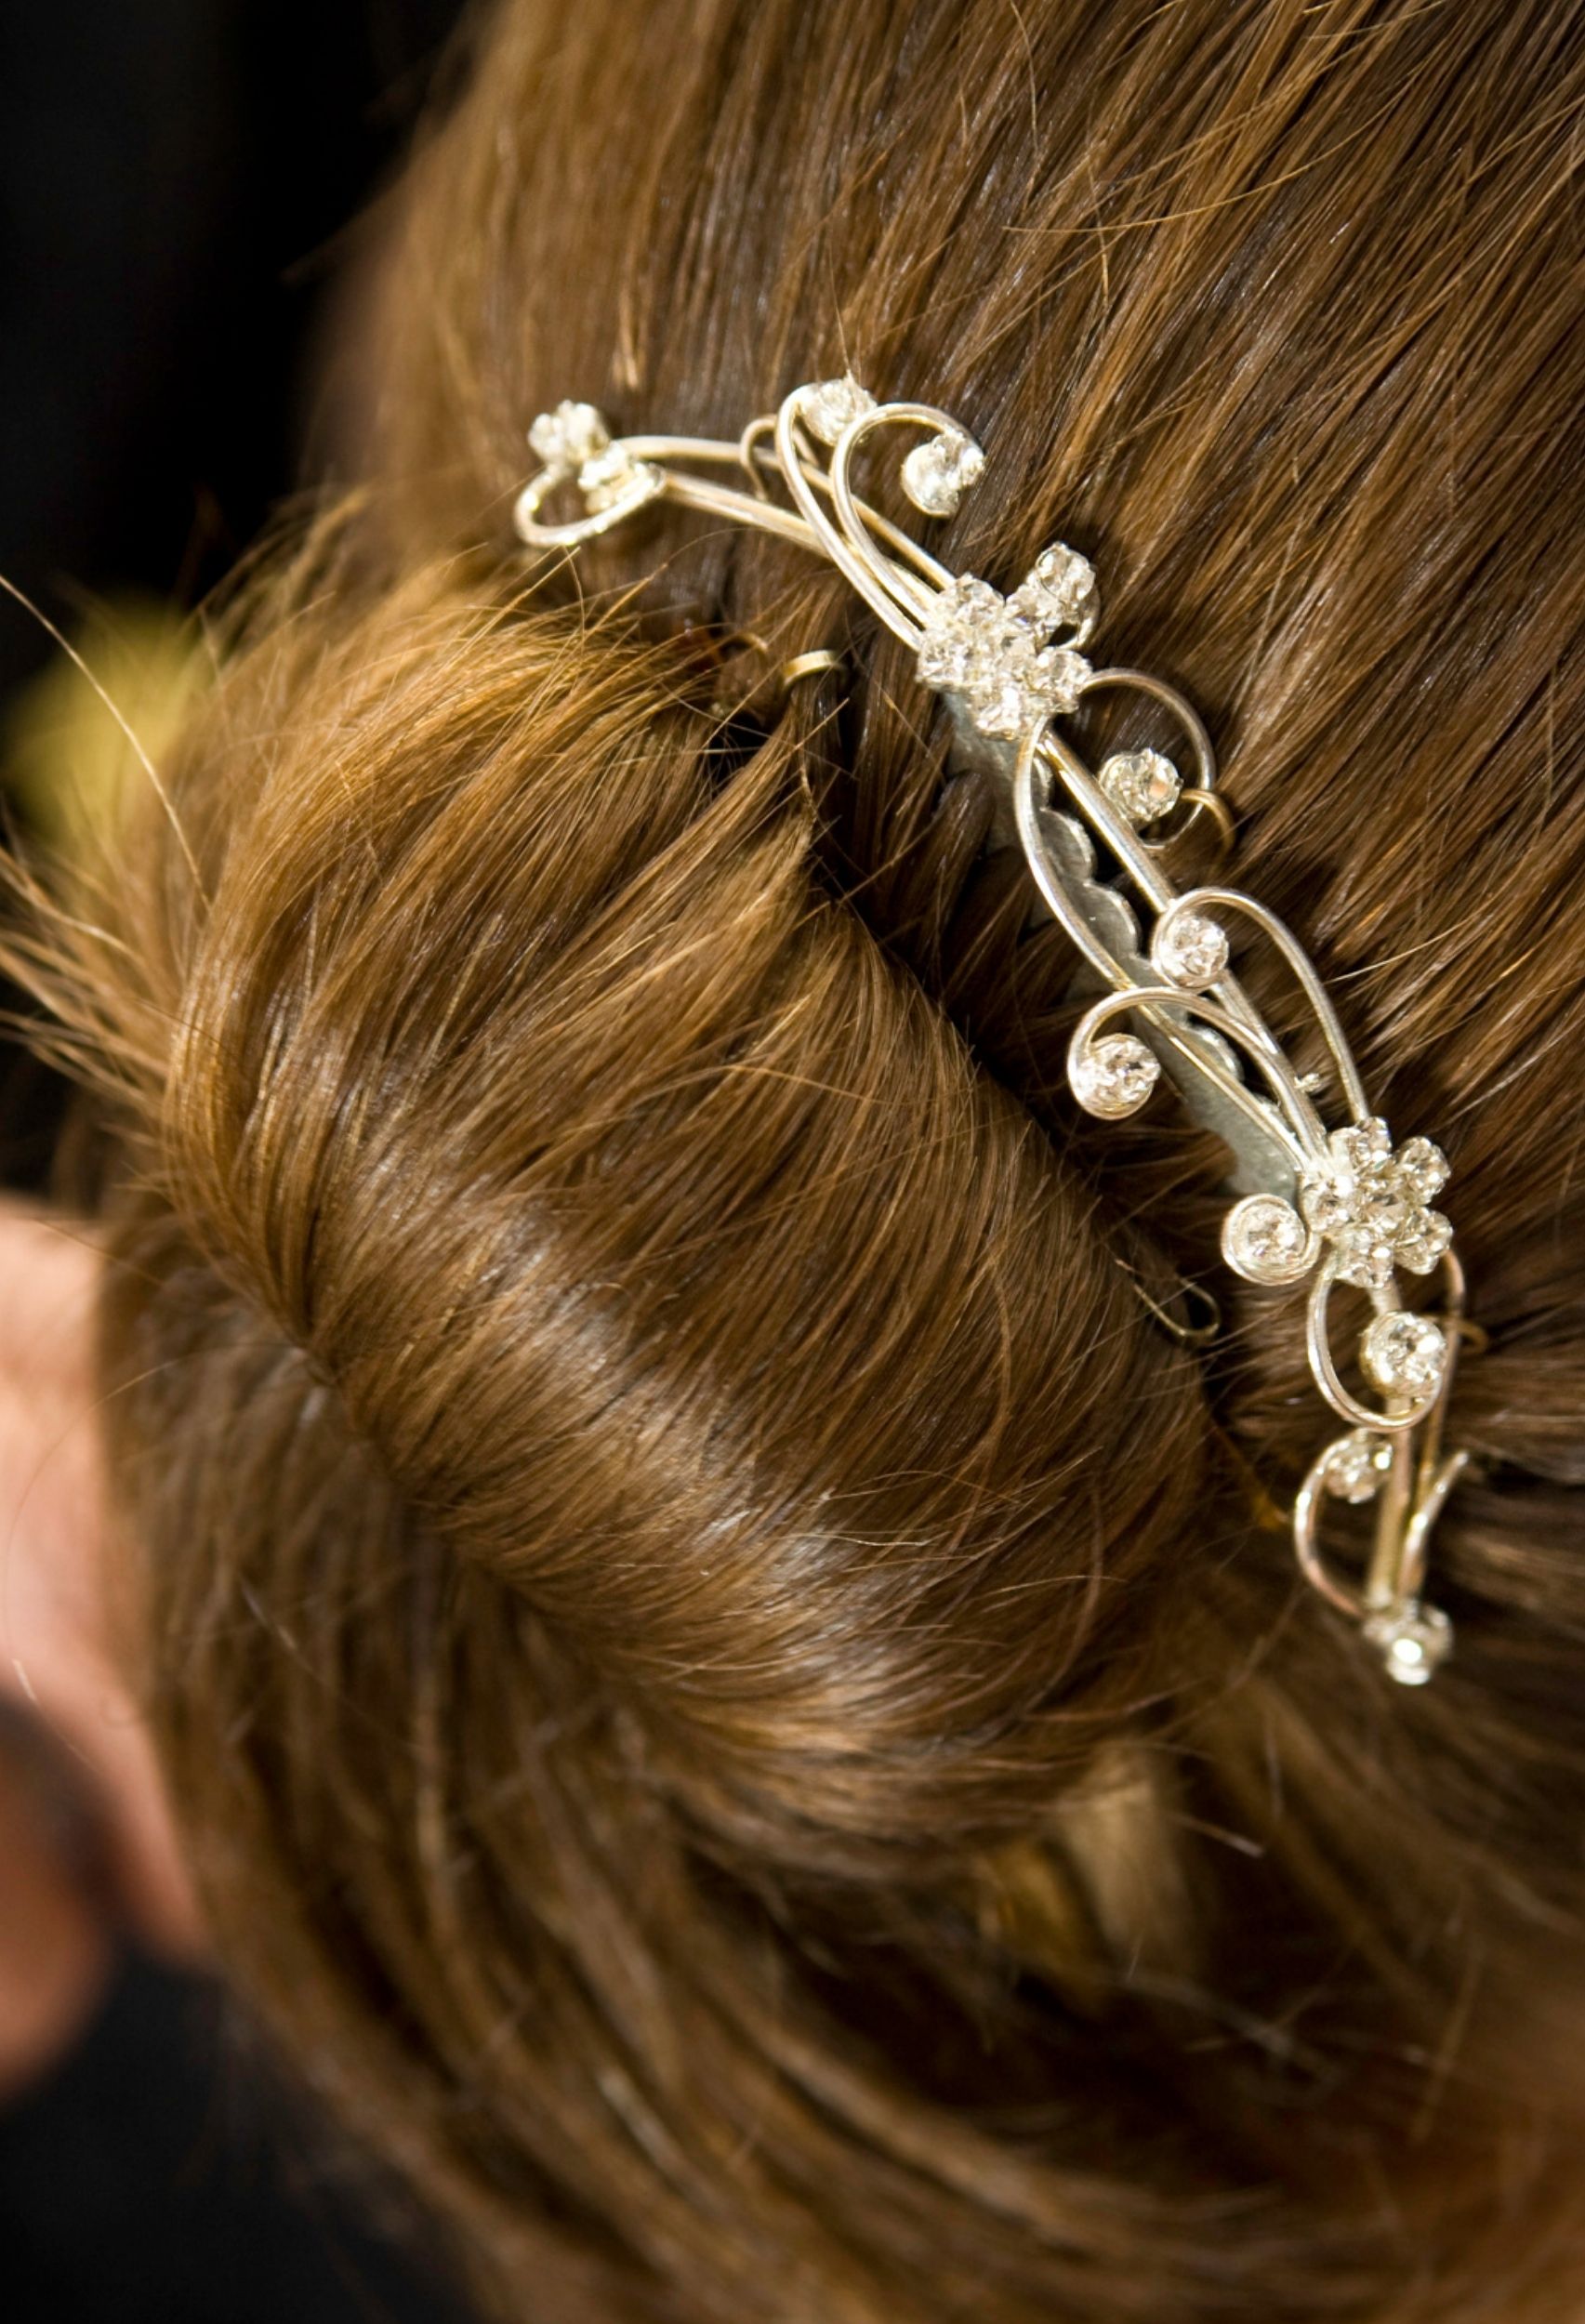 Hair Accessories That Every Woman Needs- Rita Reviews